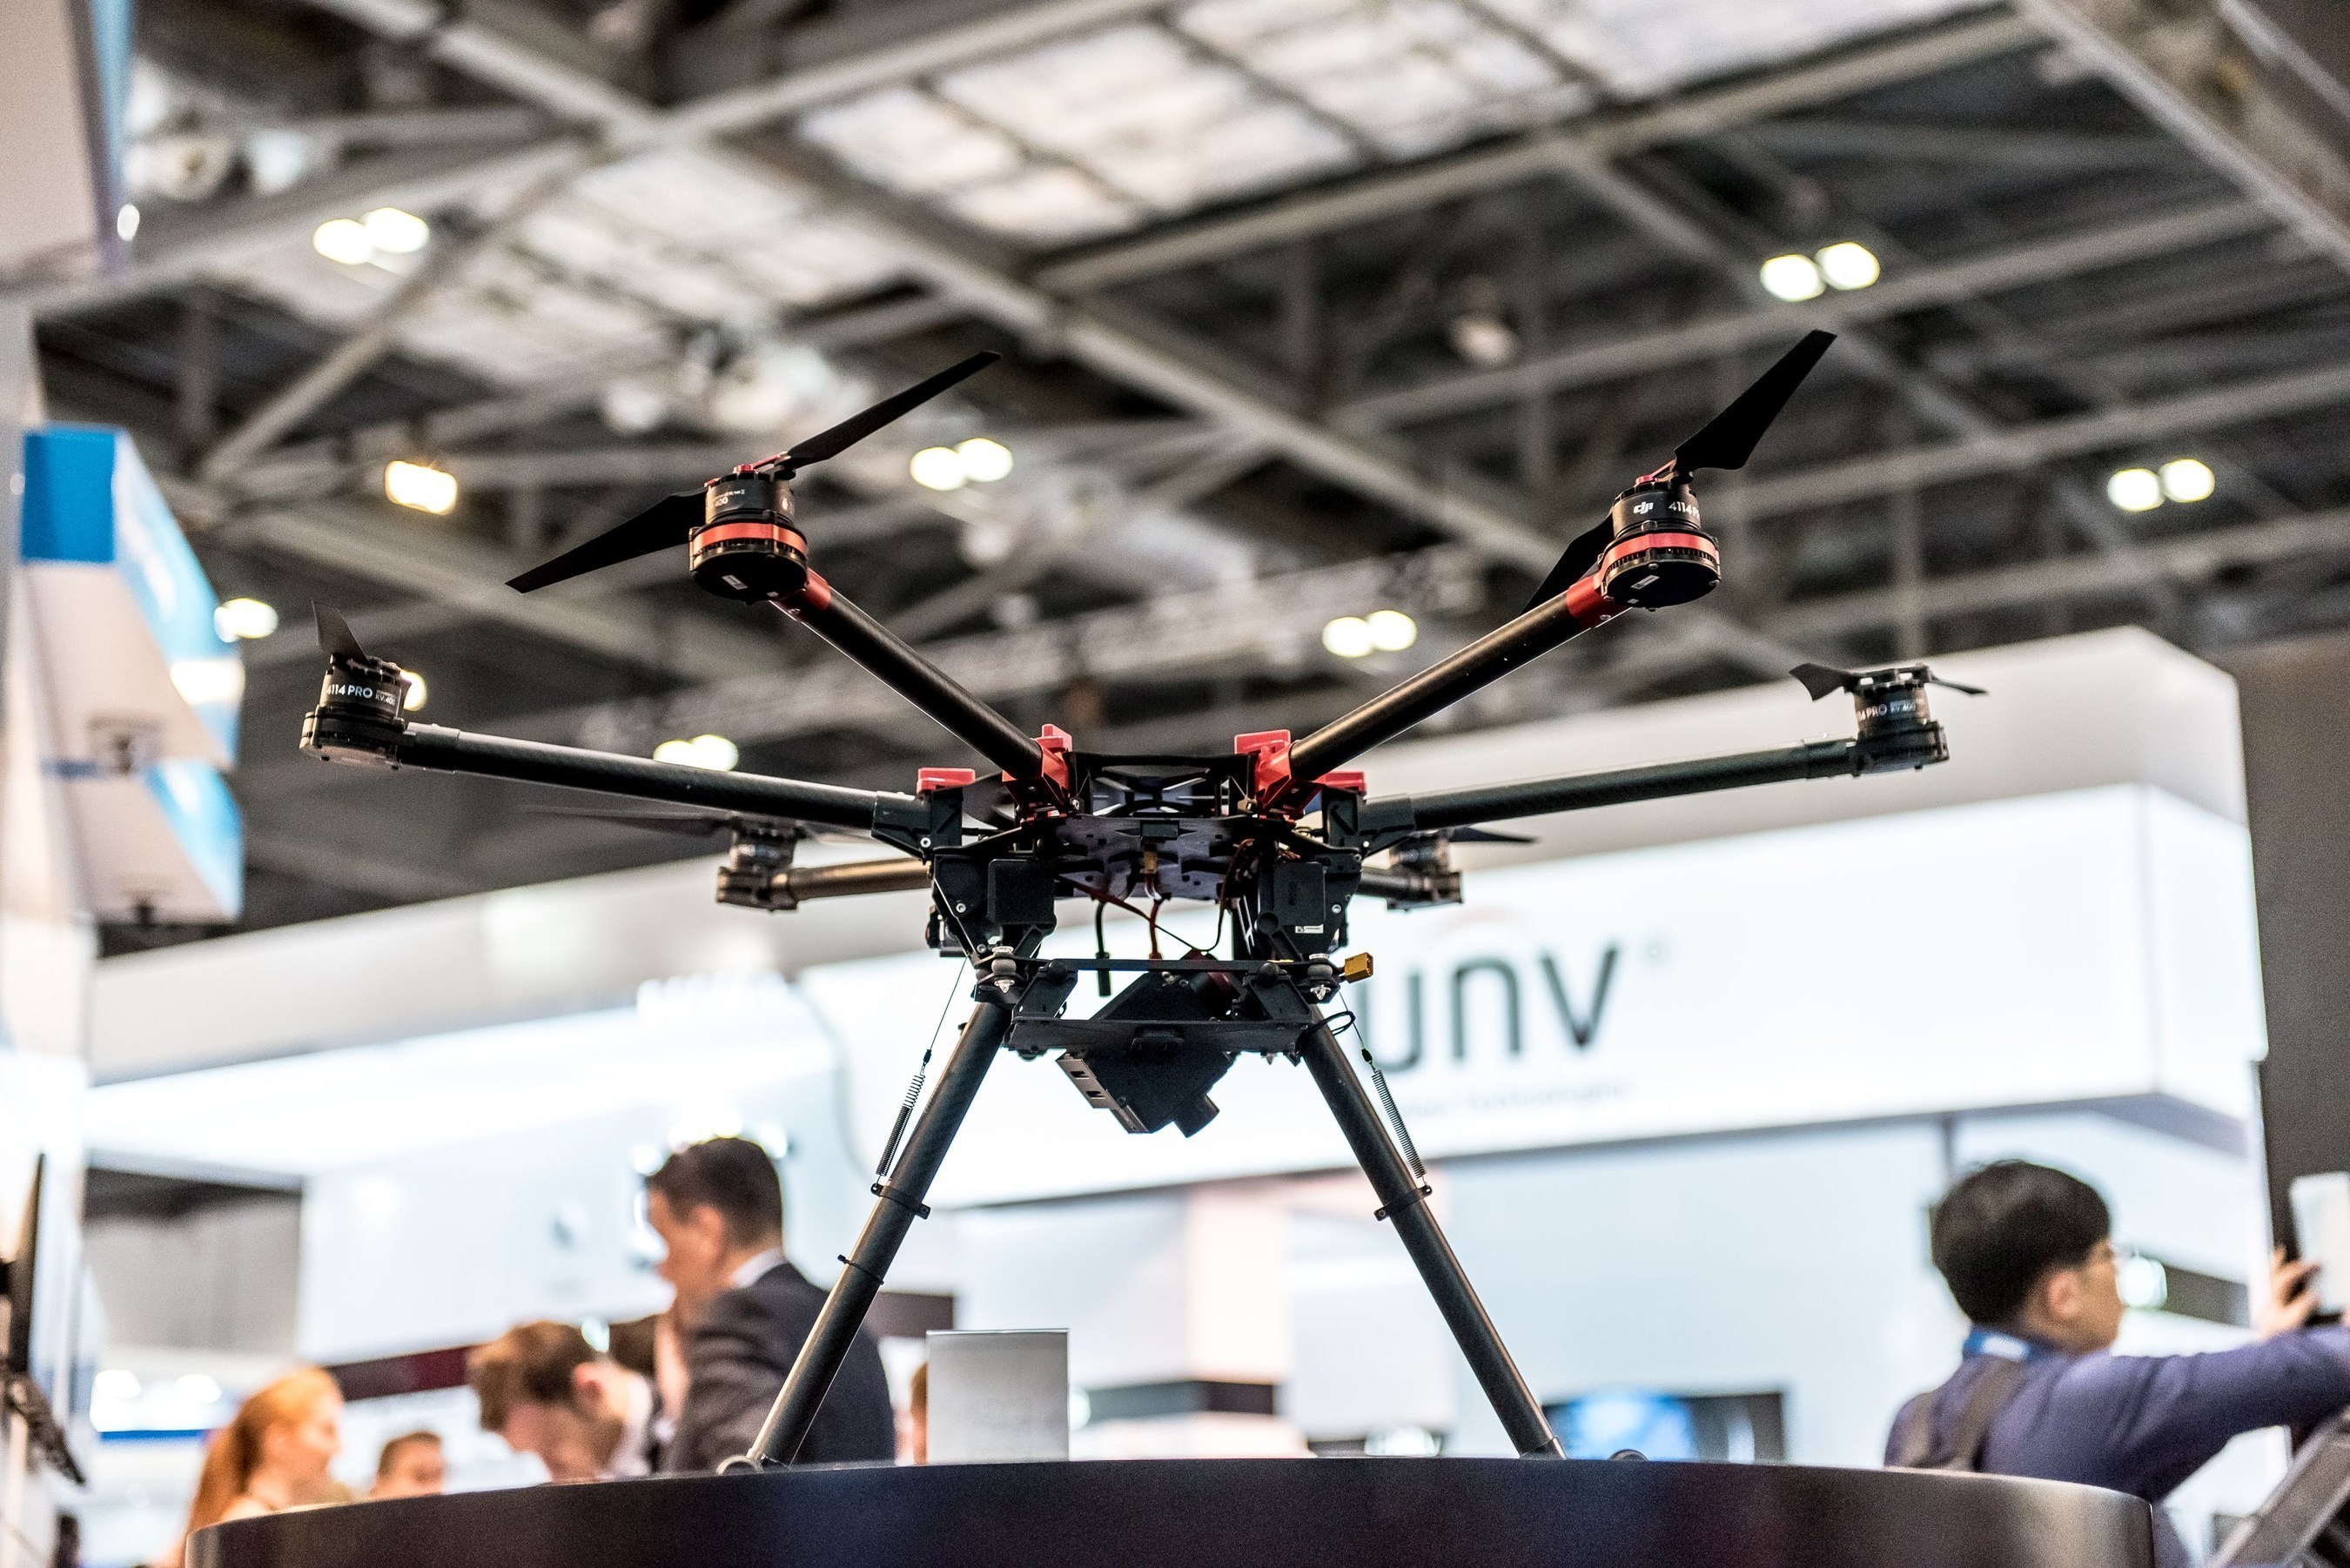 The increasing market for drones within the security industry is set to continue until at least 2025 (PRNewsFoto/IFSEC International)